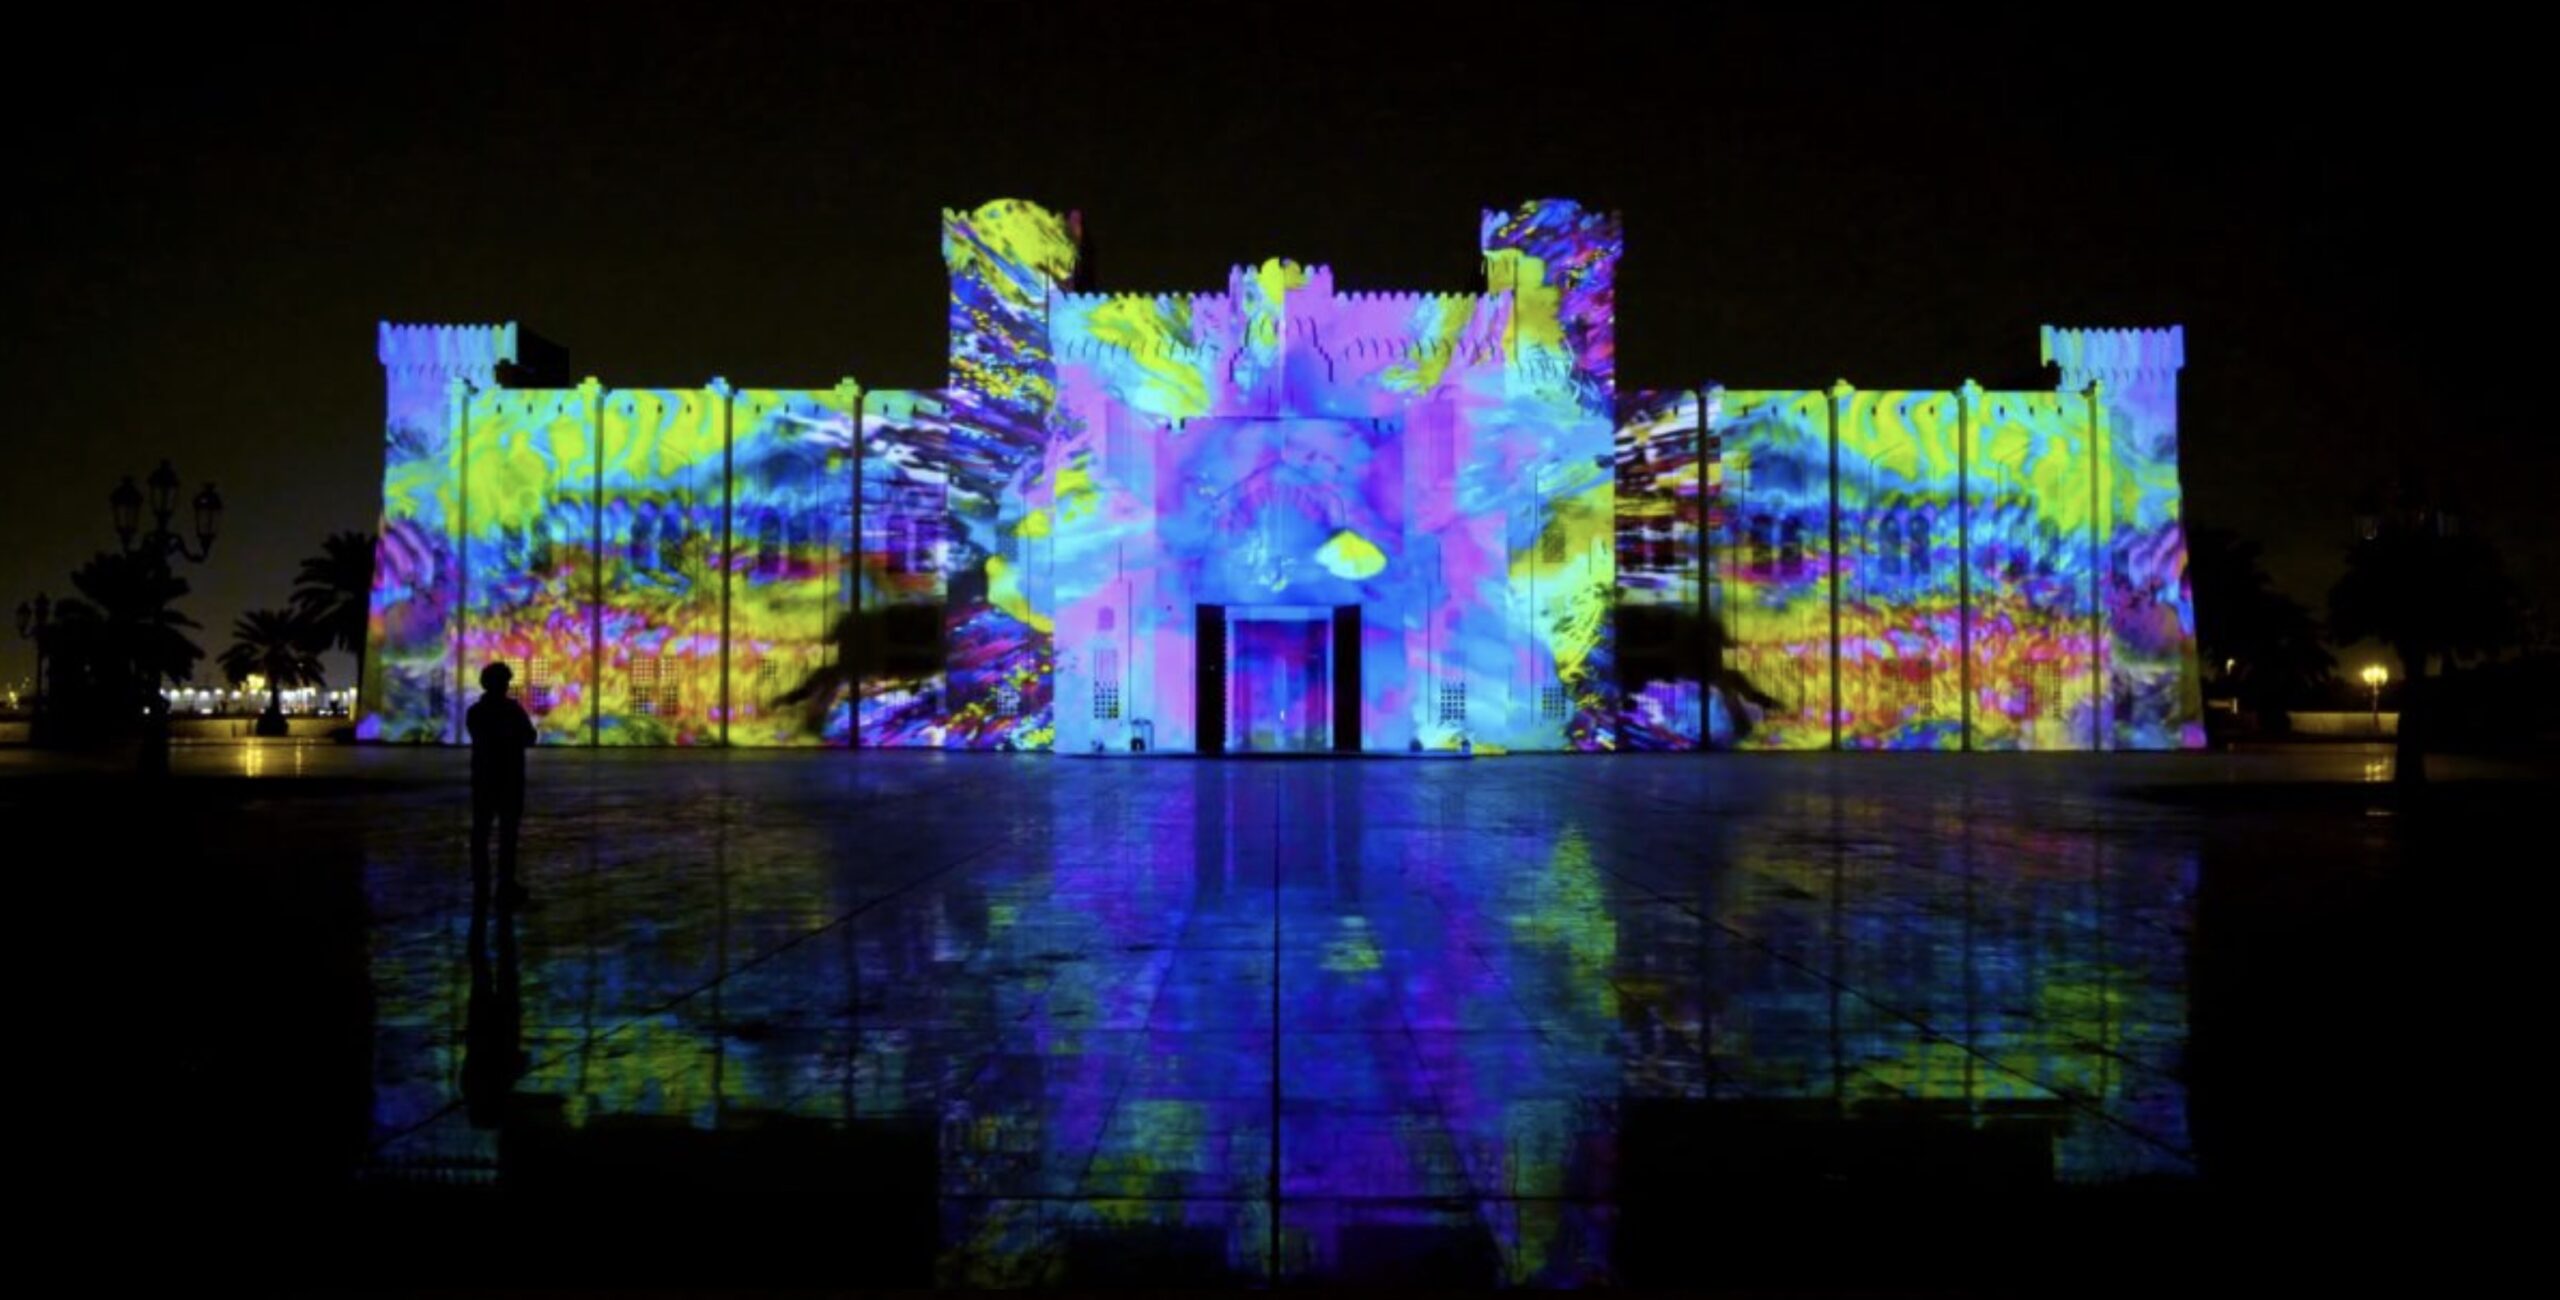 Tigrelab_Jungle_Projection_Mapping_24